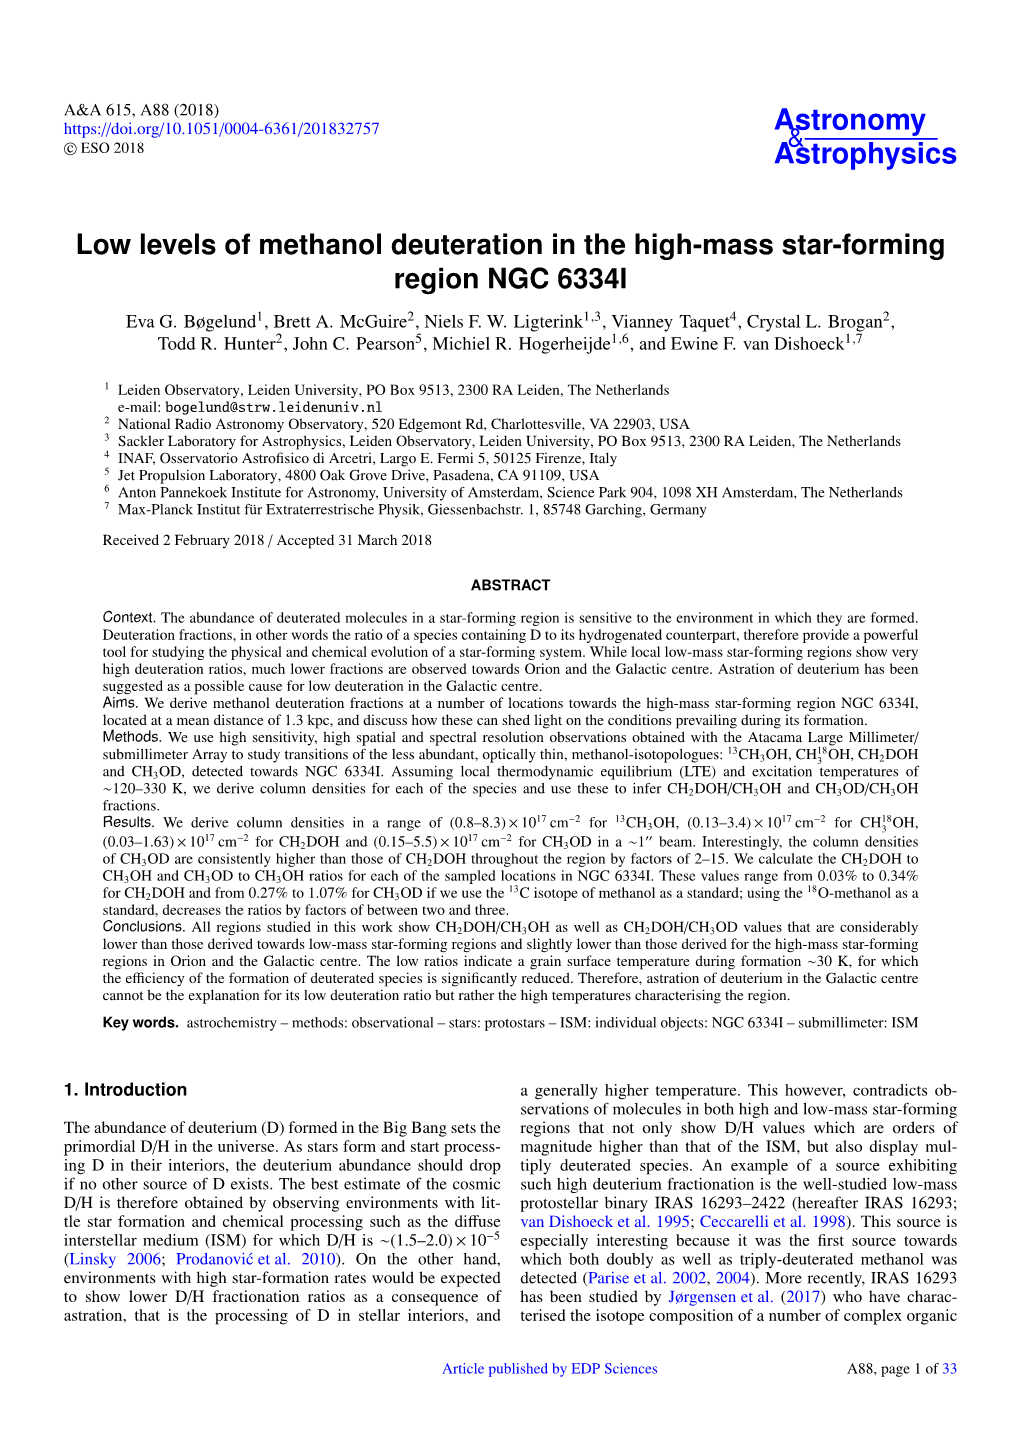 Low Levels of Methanol Deuteration in the High-Mass Star-Forming Region NGC 6334I